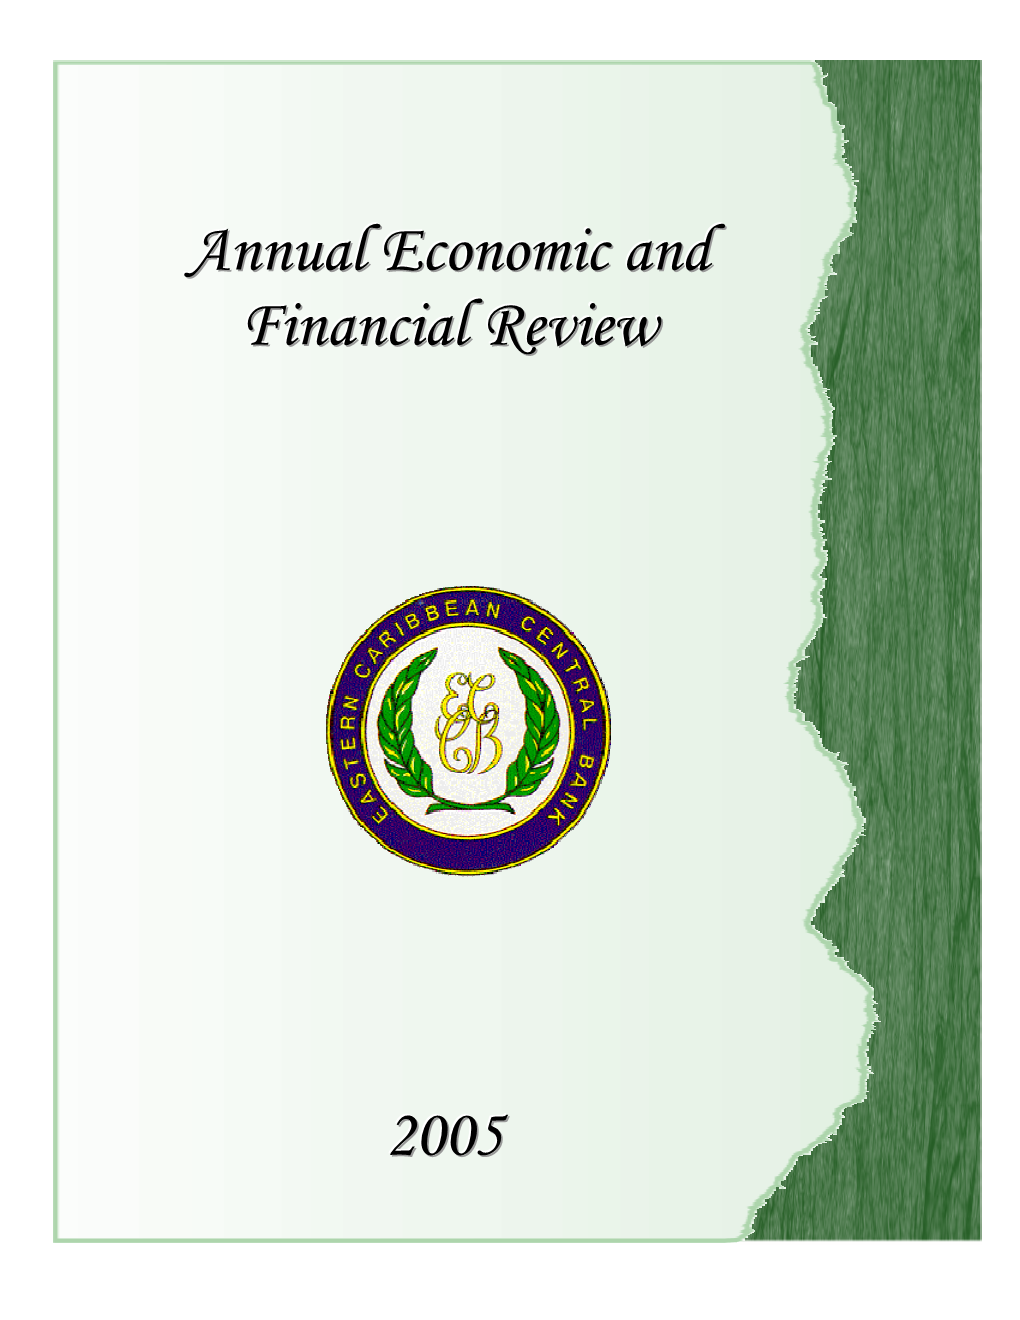 Annual Economic and Financial Review 20055